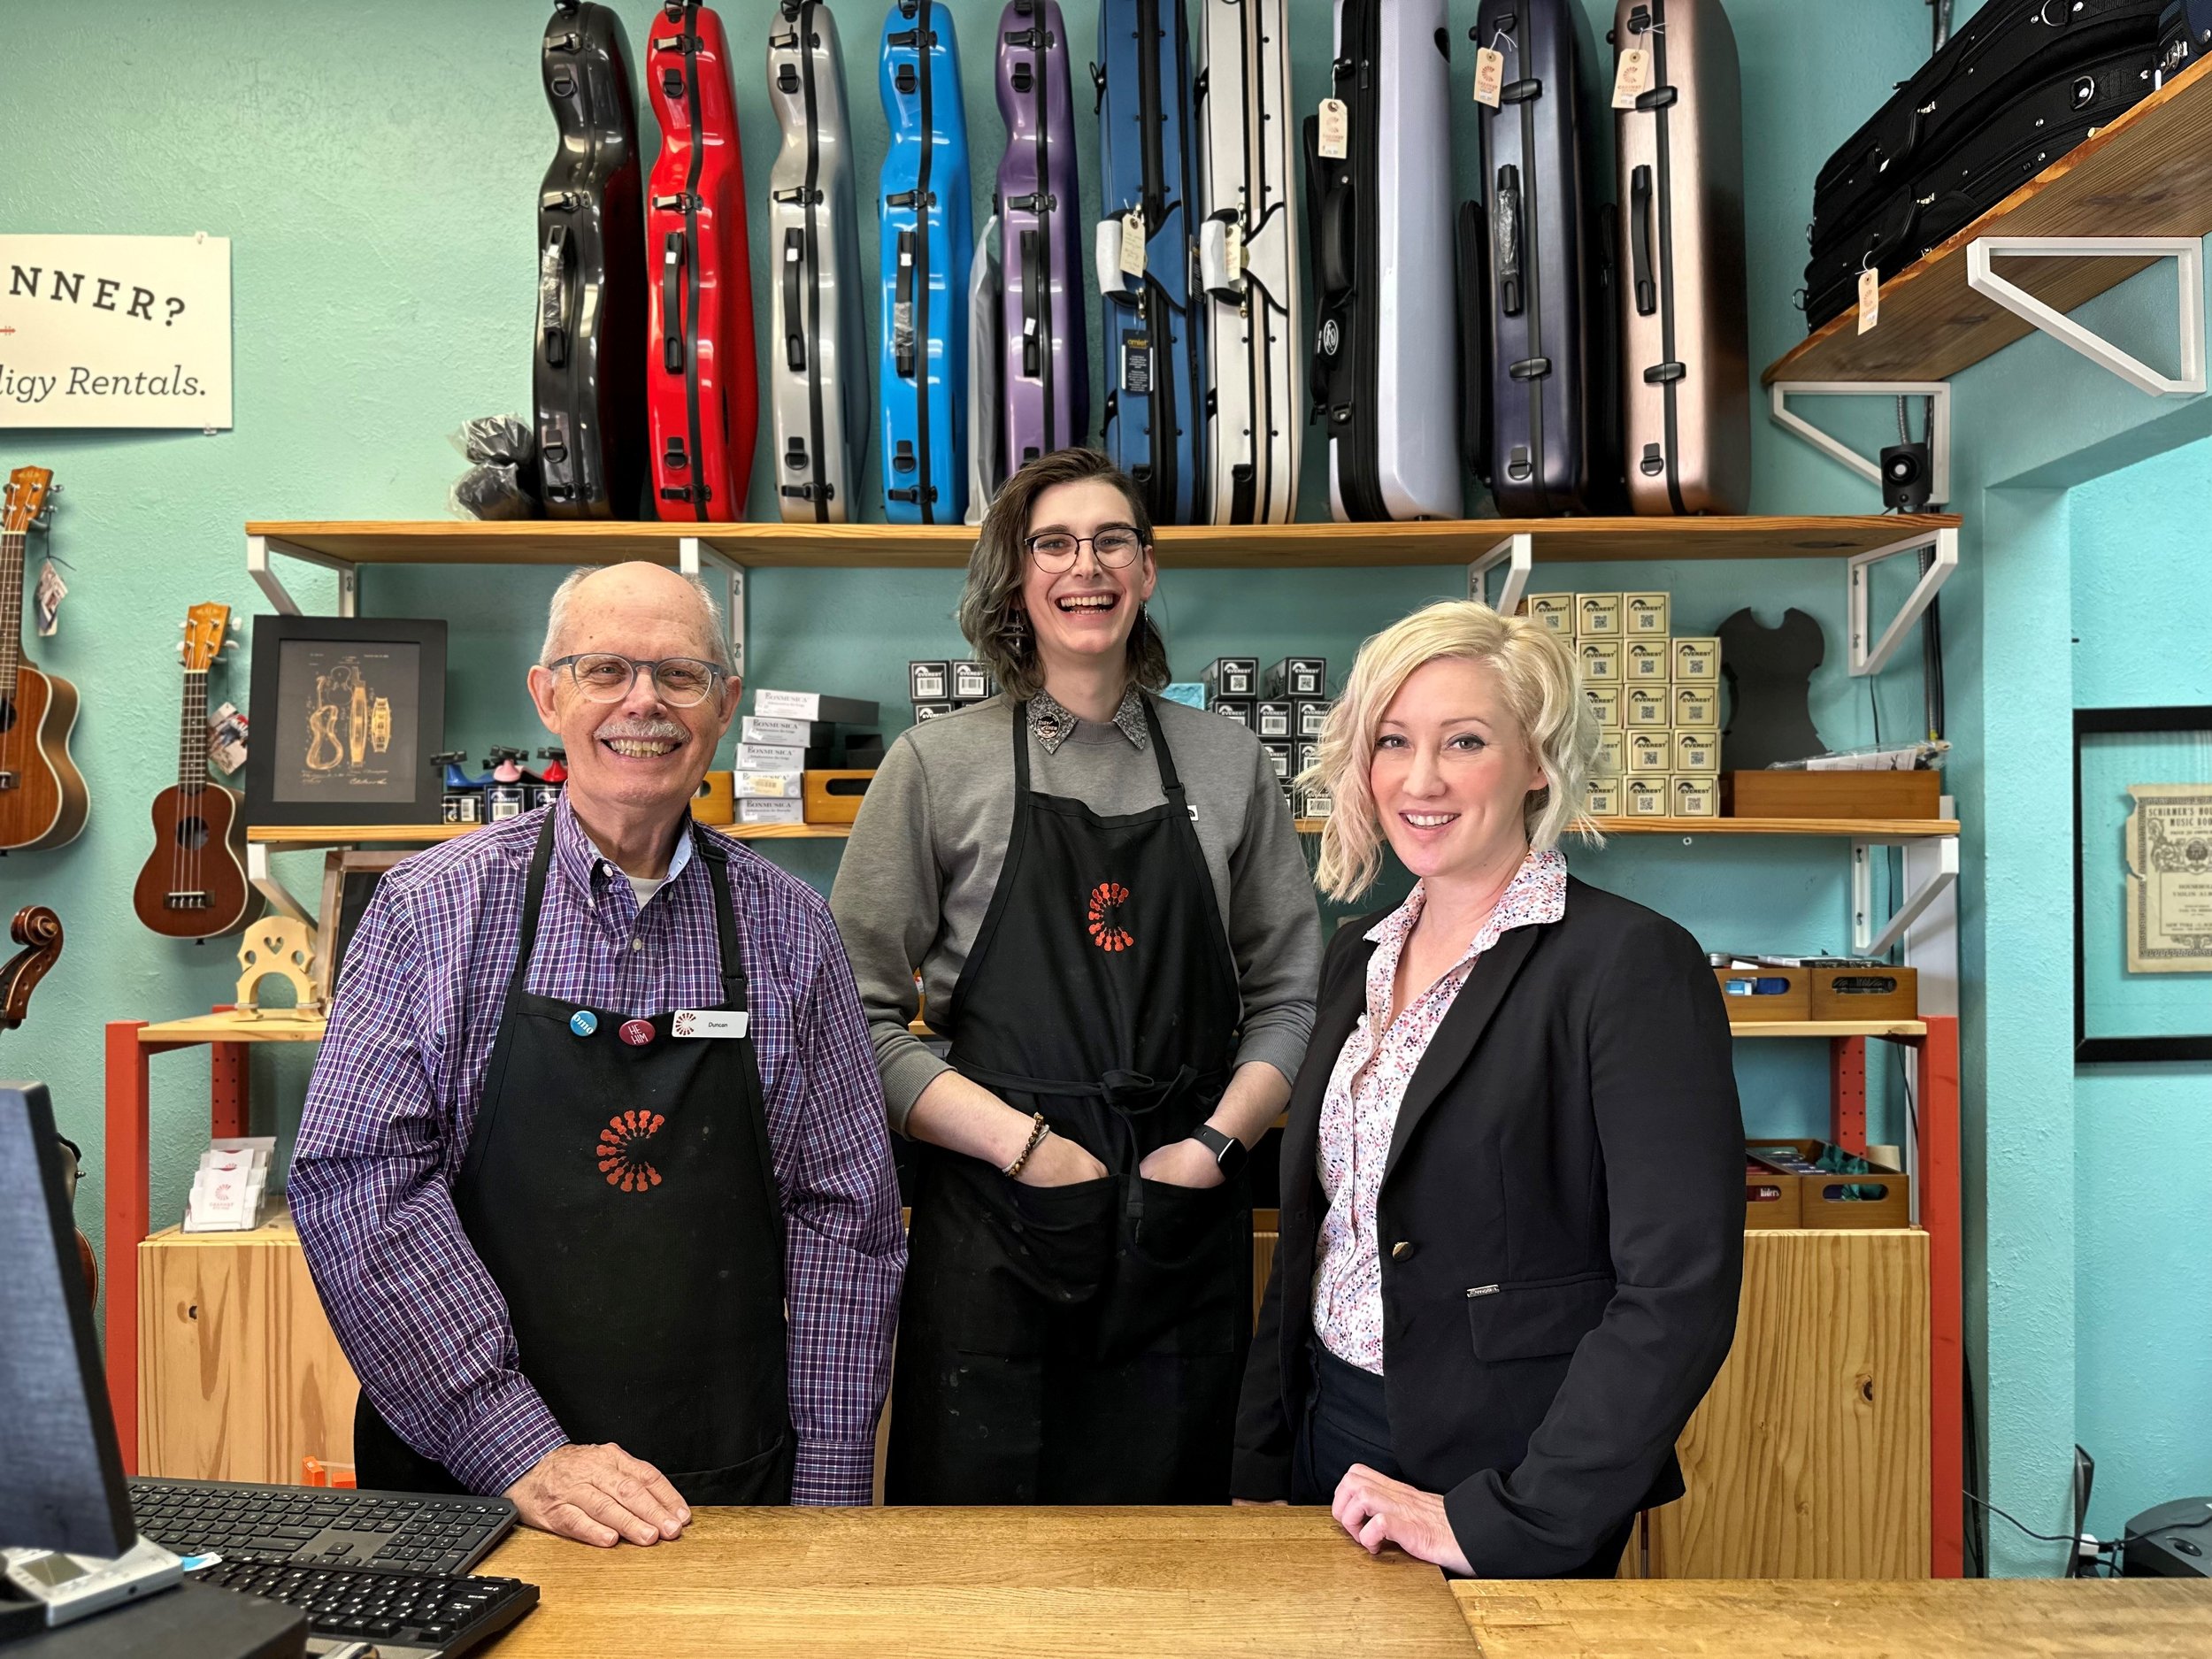  The Caraway Team (left to right): Duncan Beaver, Robyn Howe, and Shop owner, Rozie Deloach 